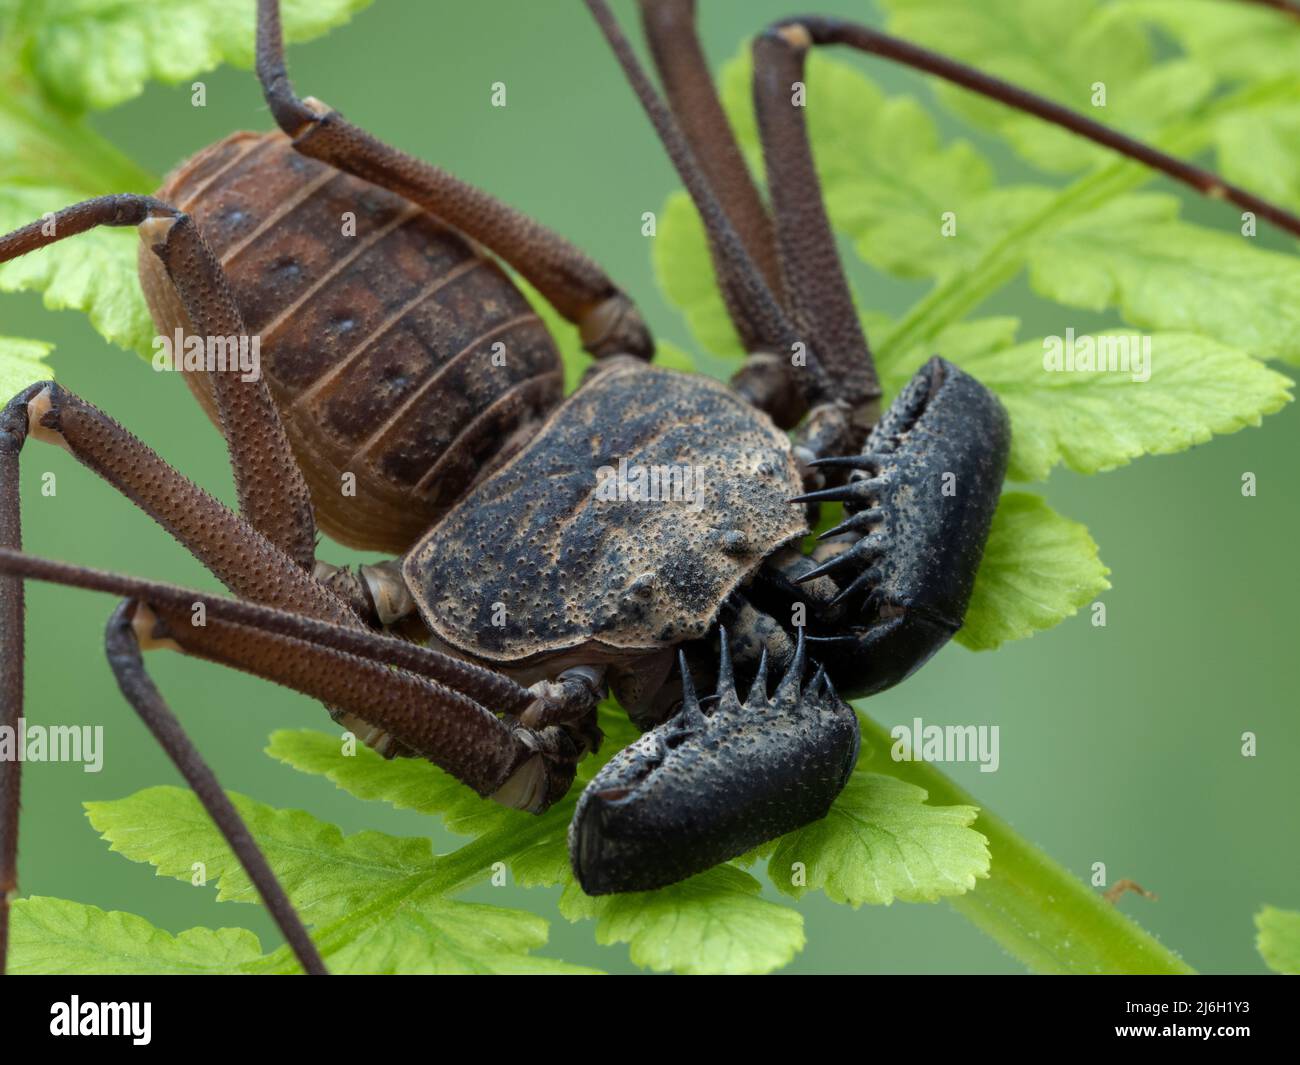 close-up of a tailless whip scorpion, Phrynus barbadensis, on a fern frond, from above Stock Photo